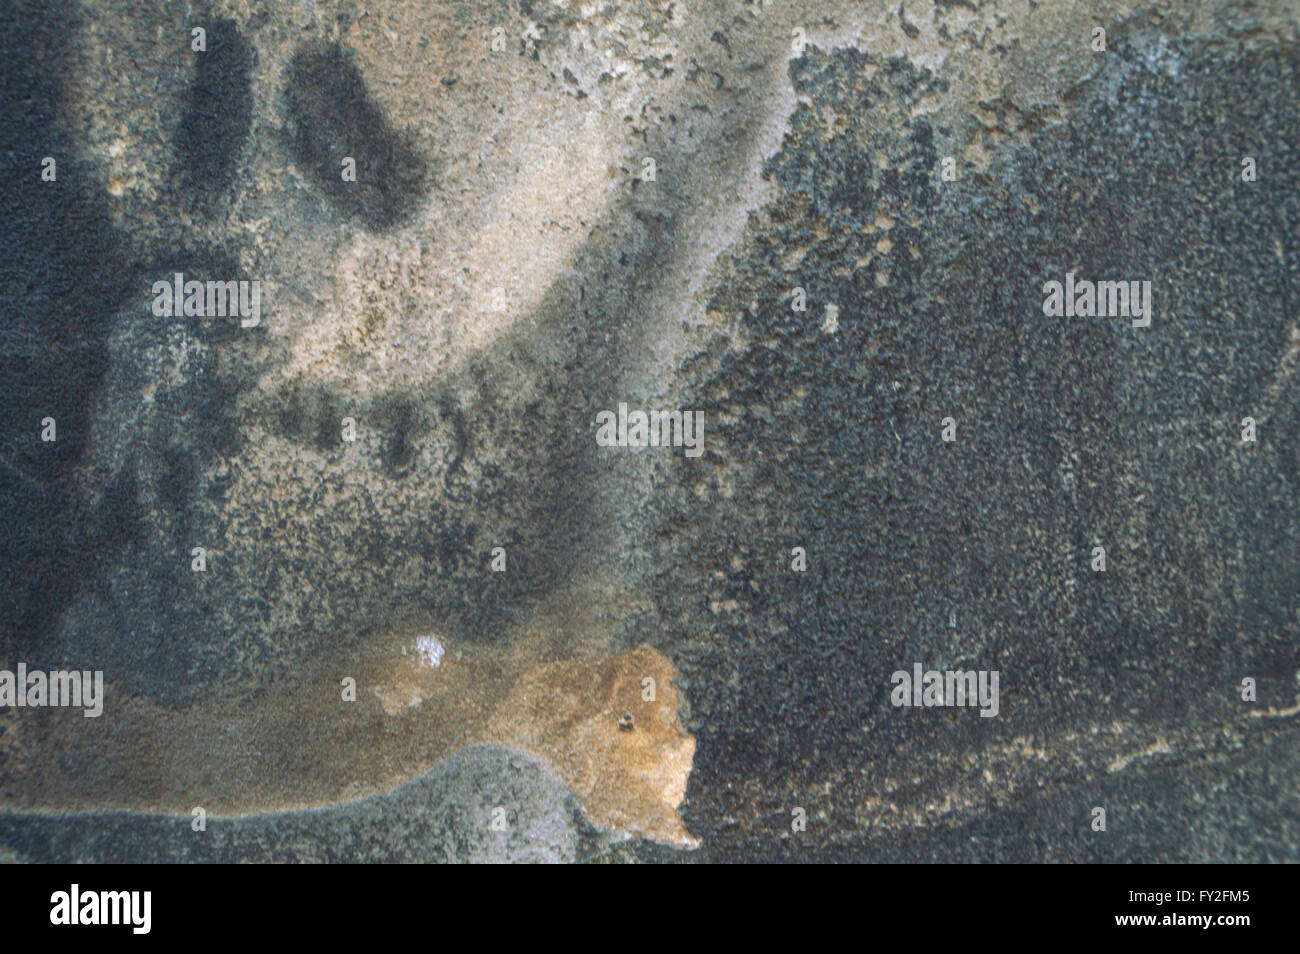 Old grunge obsolete wall, background texture image. Stock Photo